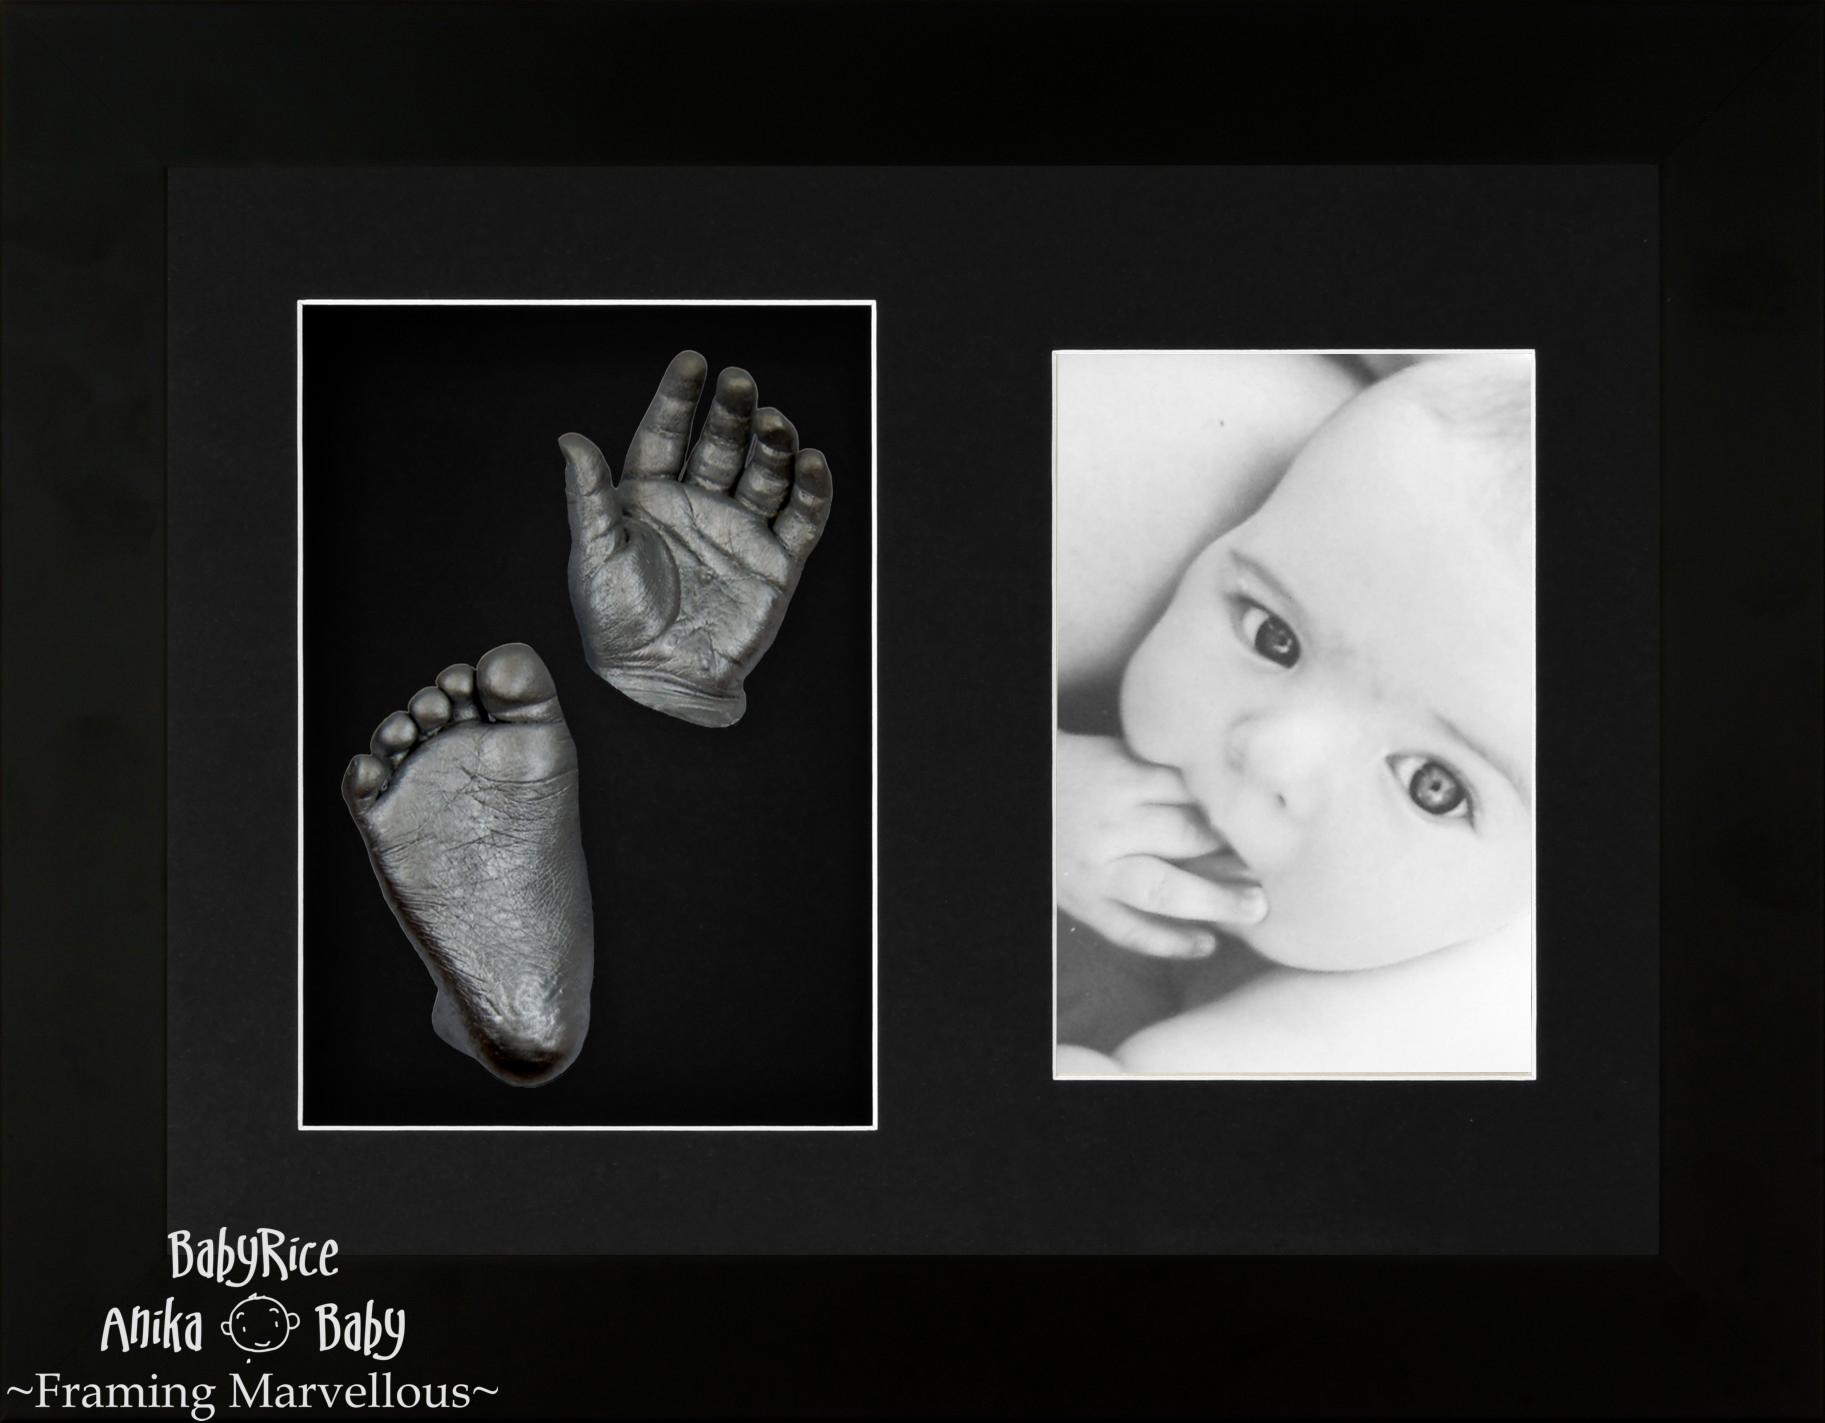 Baby Casting Kit with Black Photo and Casts Display Frame Black Inserts / Pewter Paint